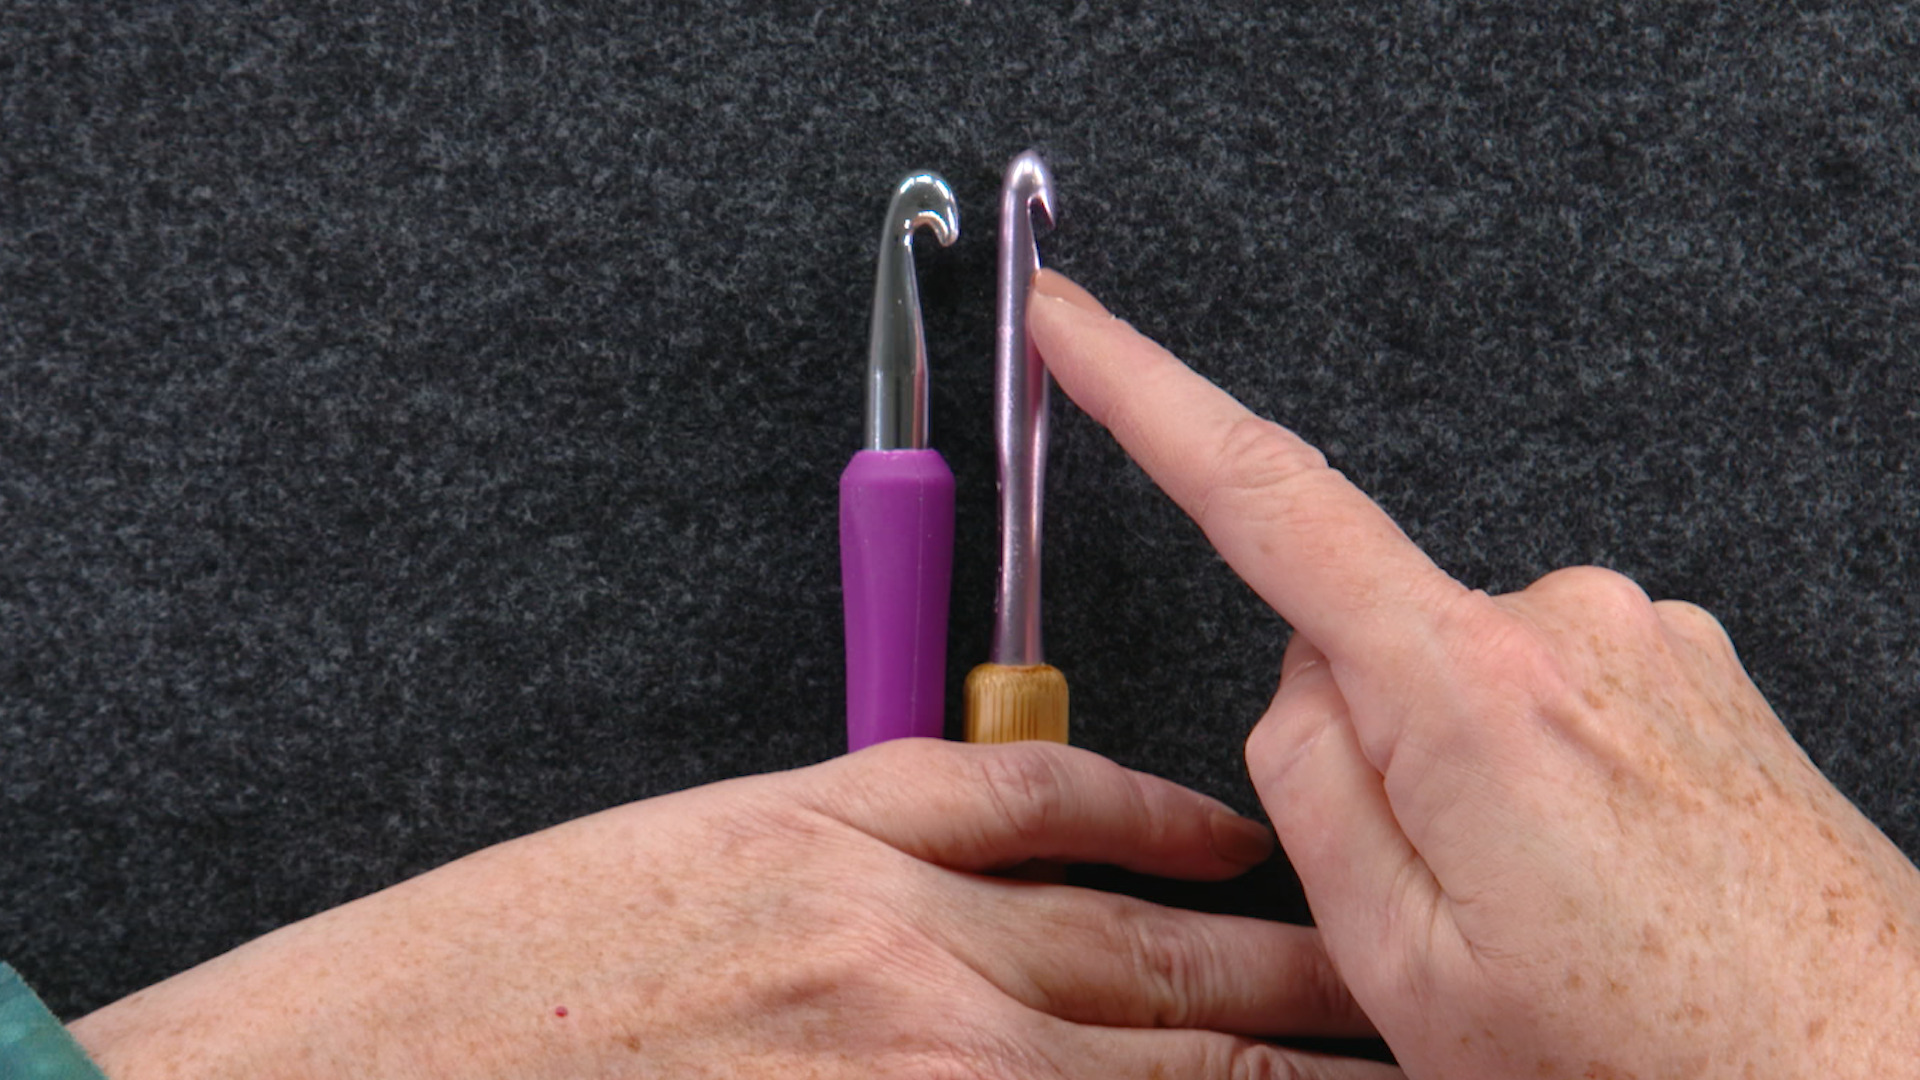 Top 12 Crochet Hooks and Their Perks: Discover Your Match